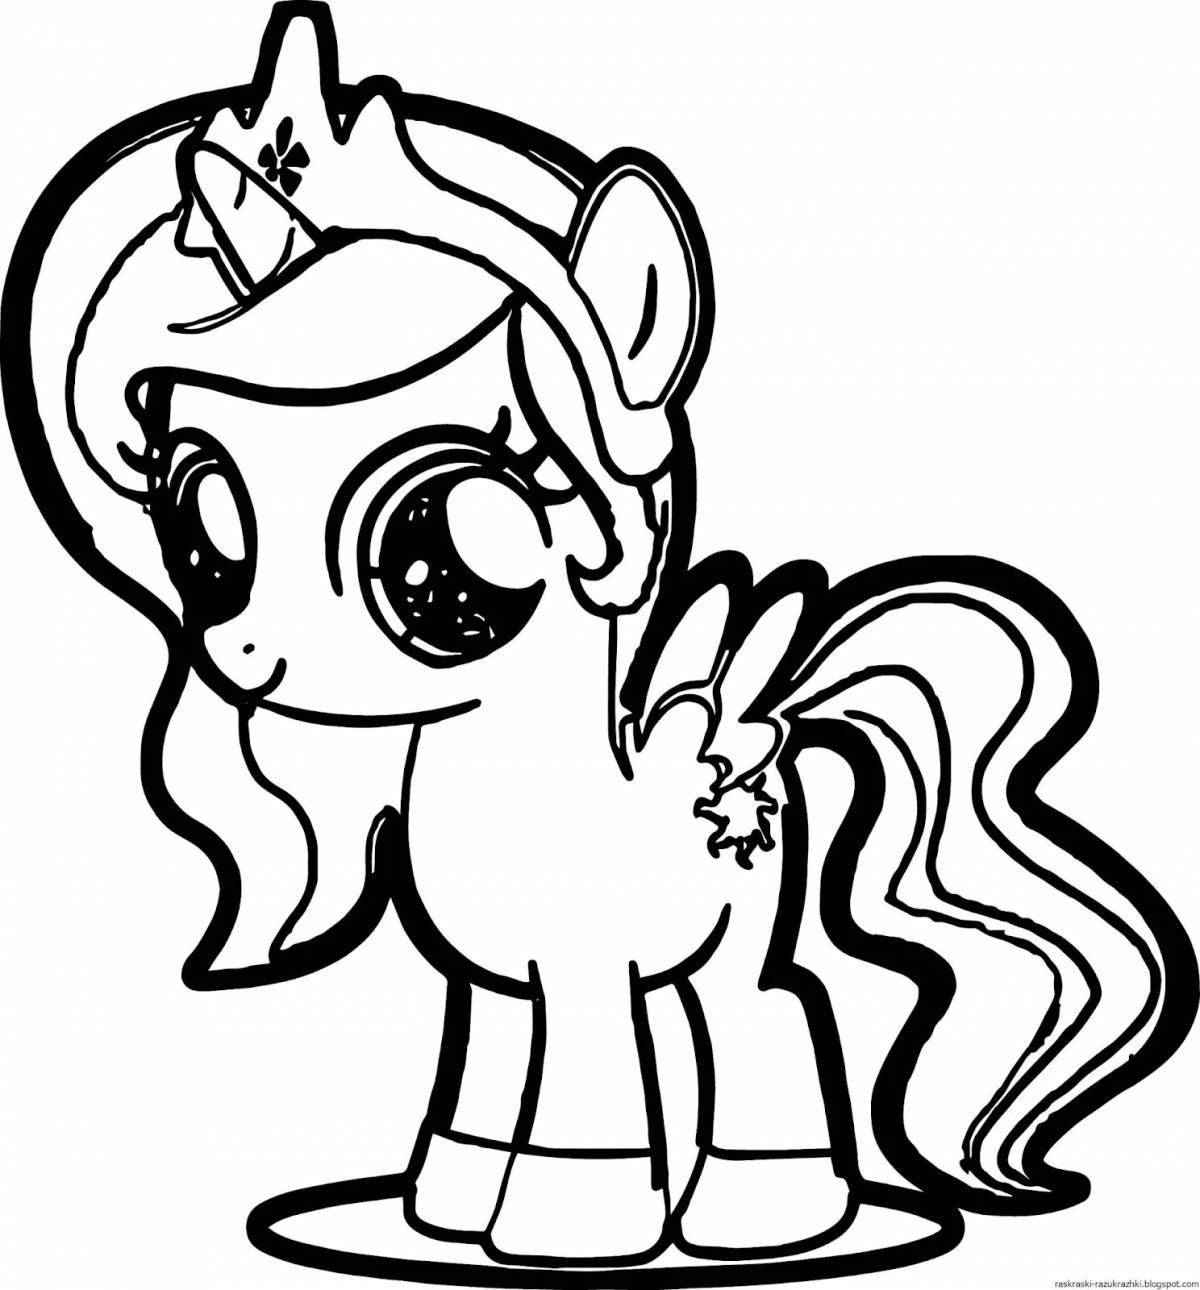 Exotic pony coloring